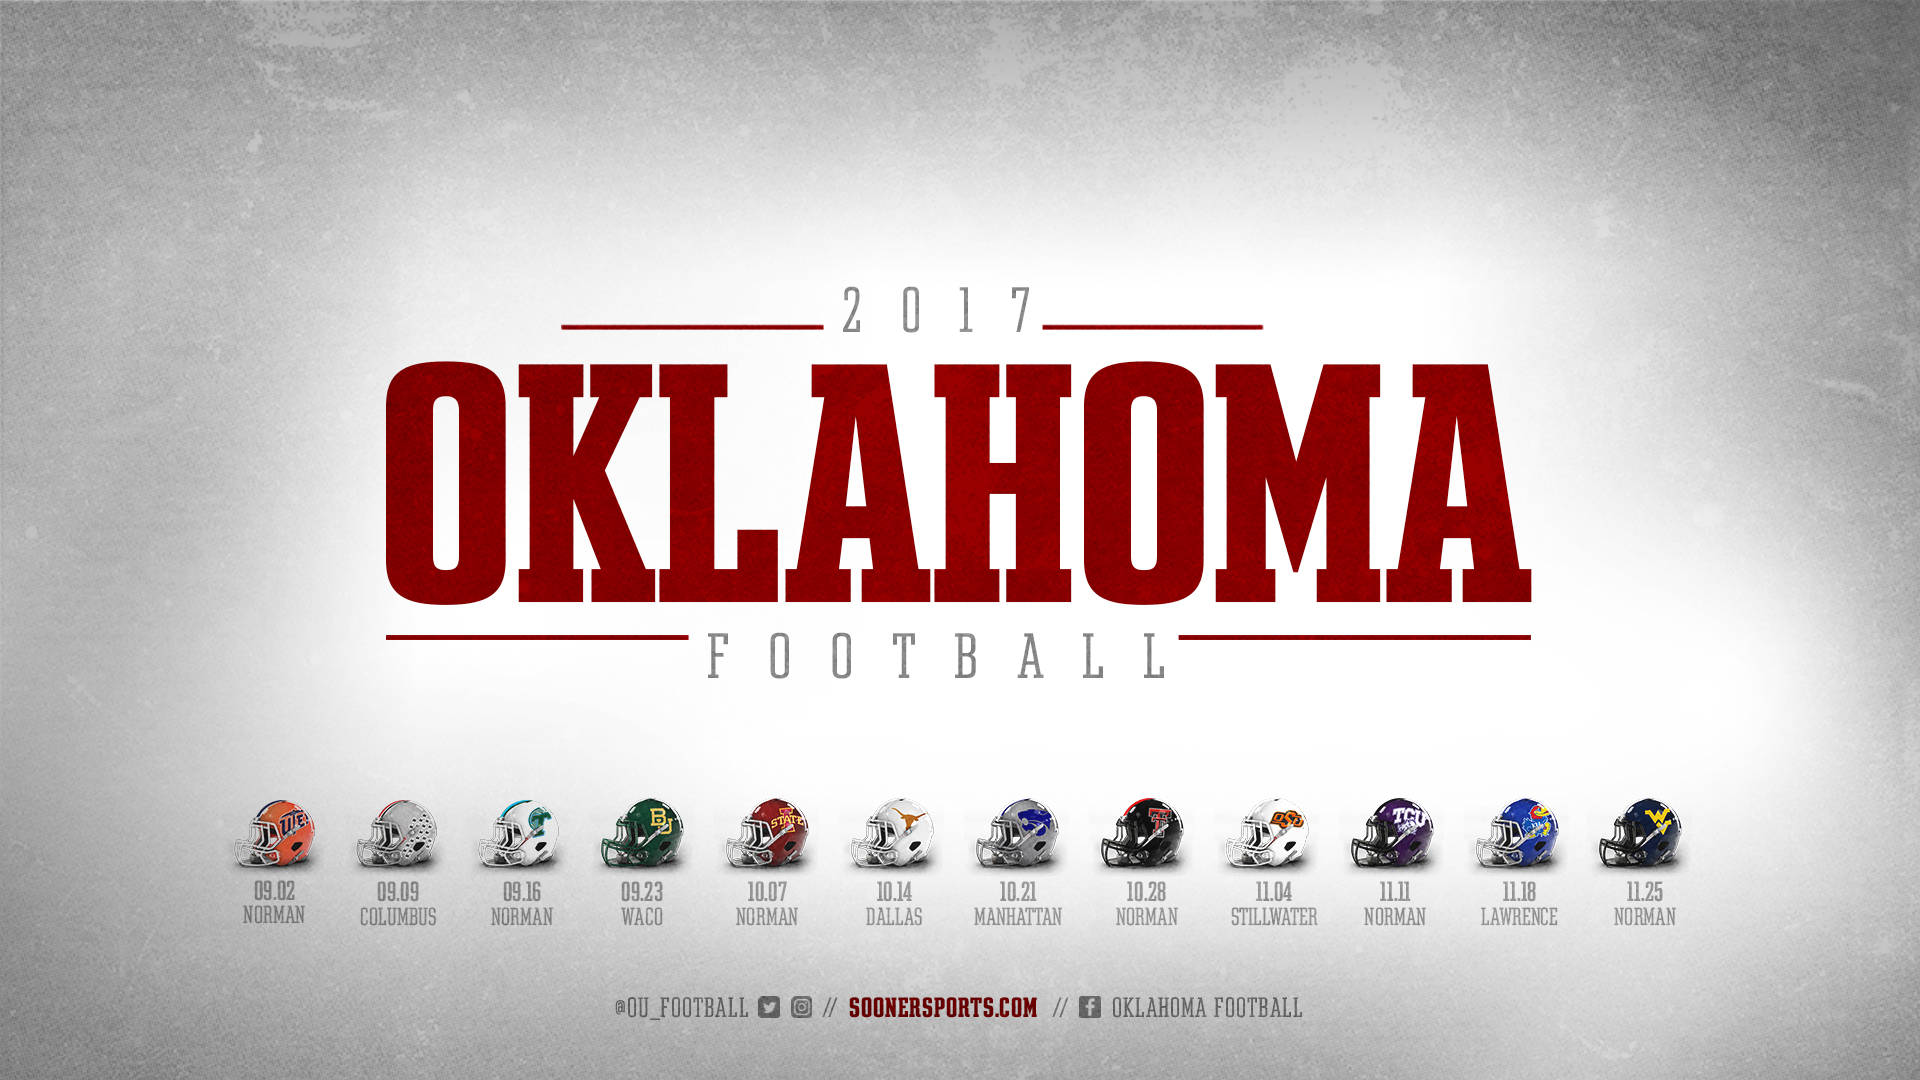 🔥 Free download OUs Big Football Schedule Announced University of